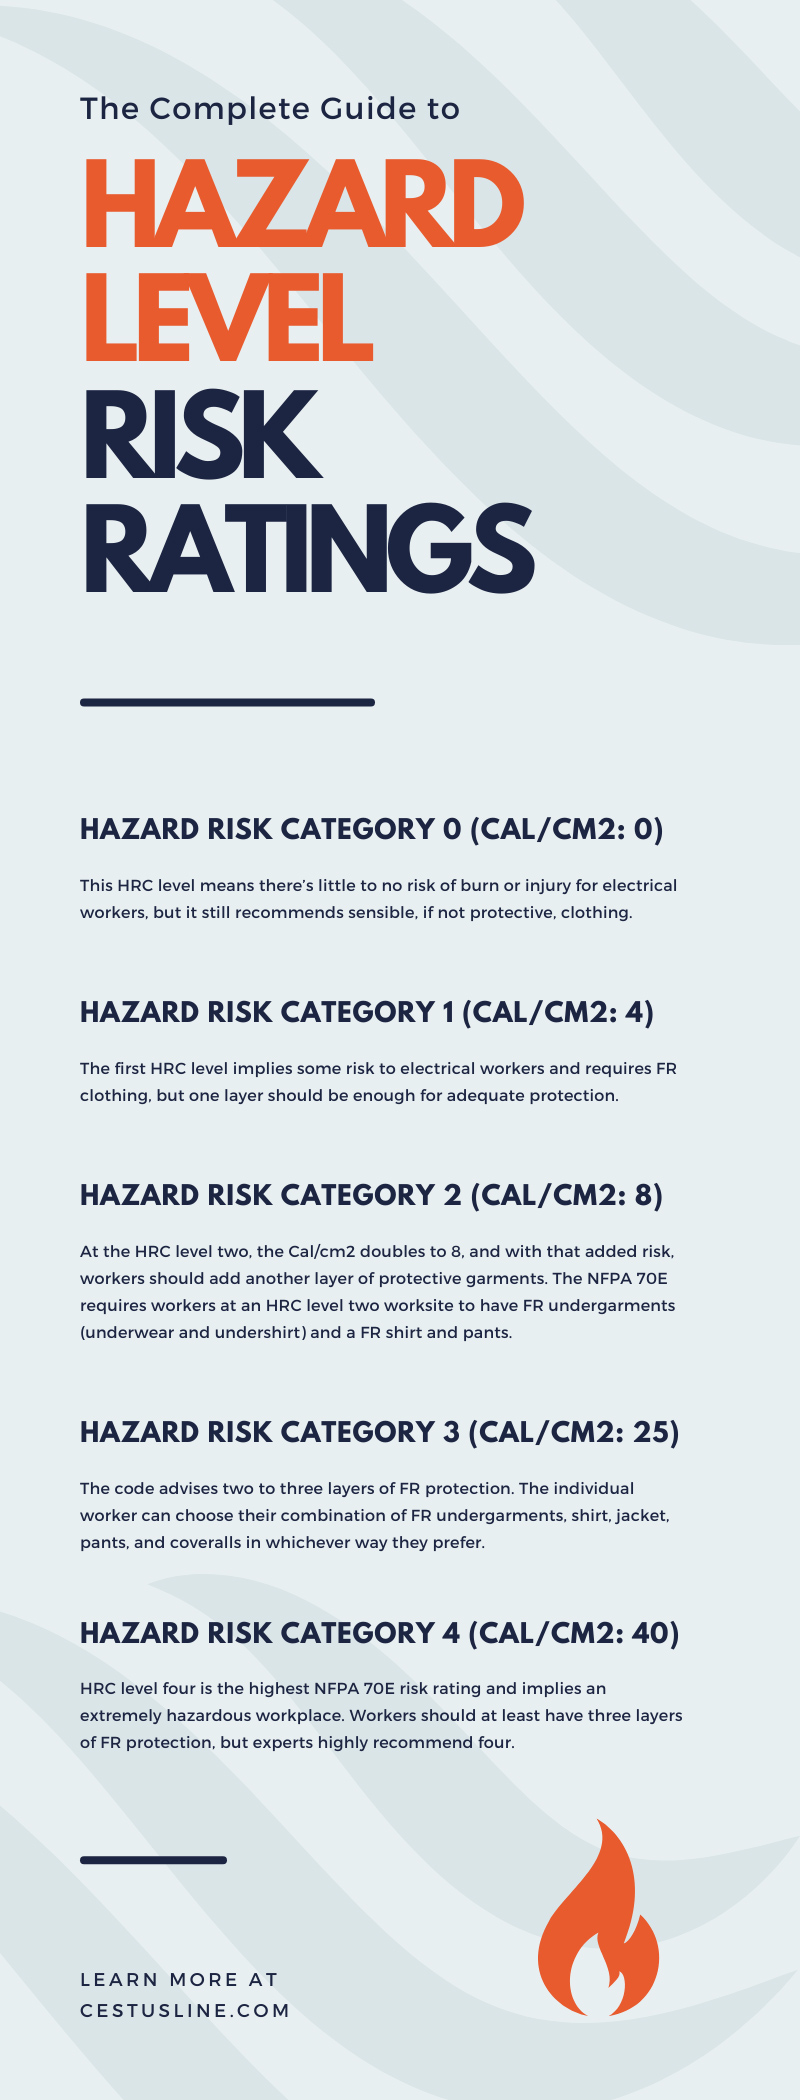 The Complete Guide to Hazard Level Risk Ratings